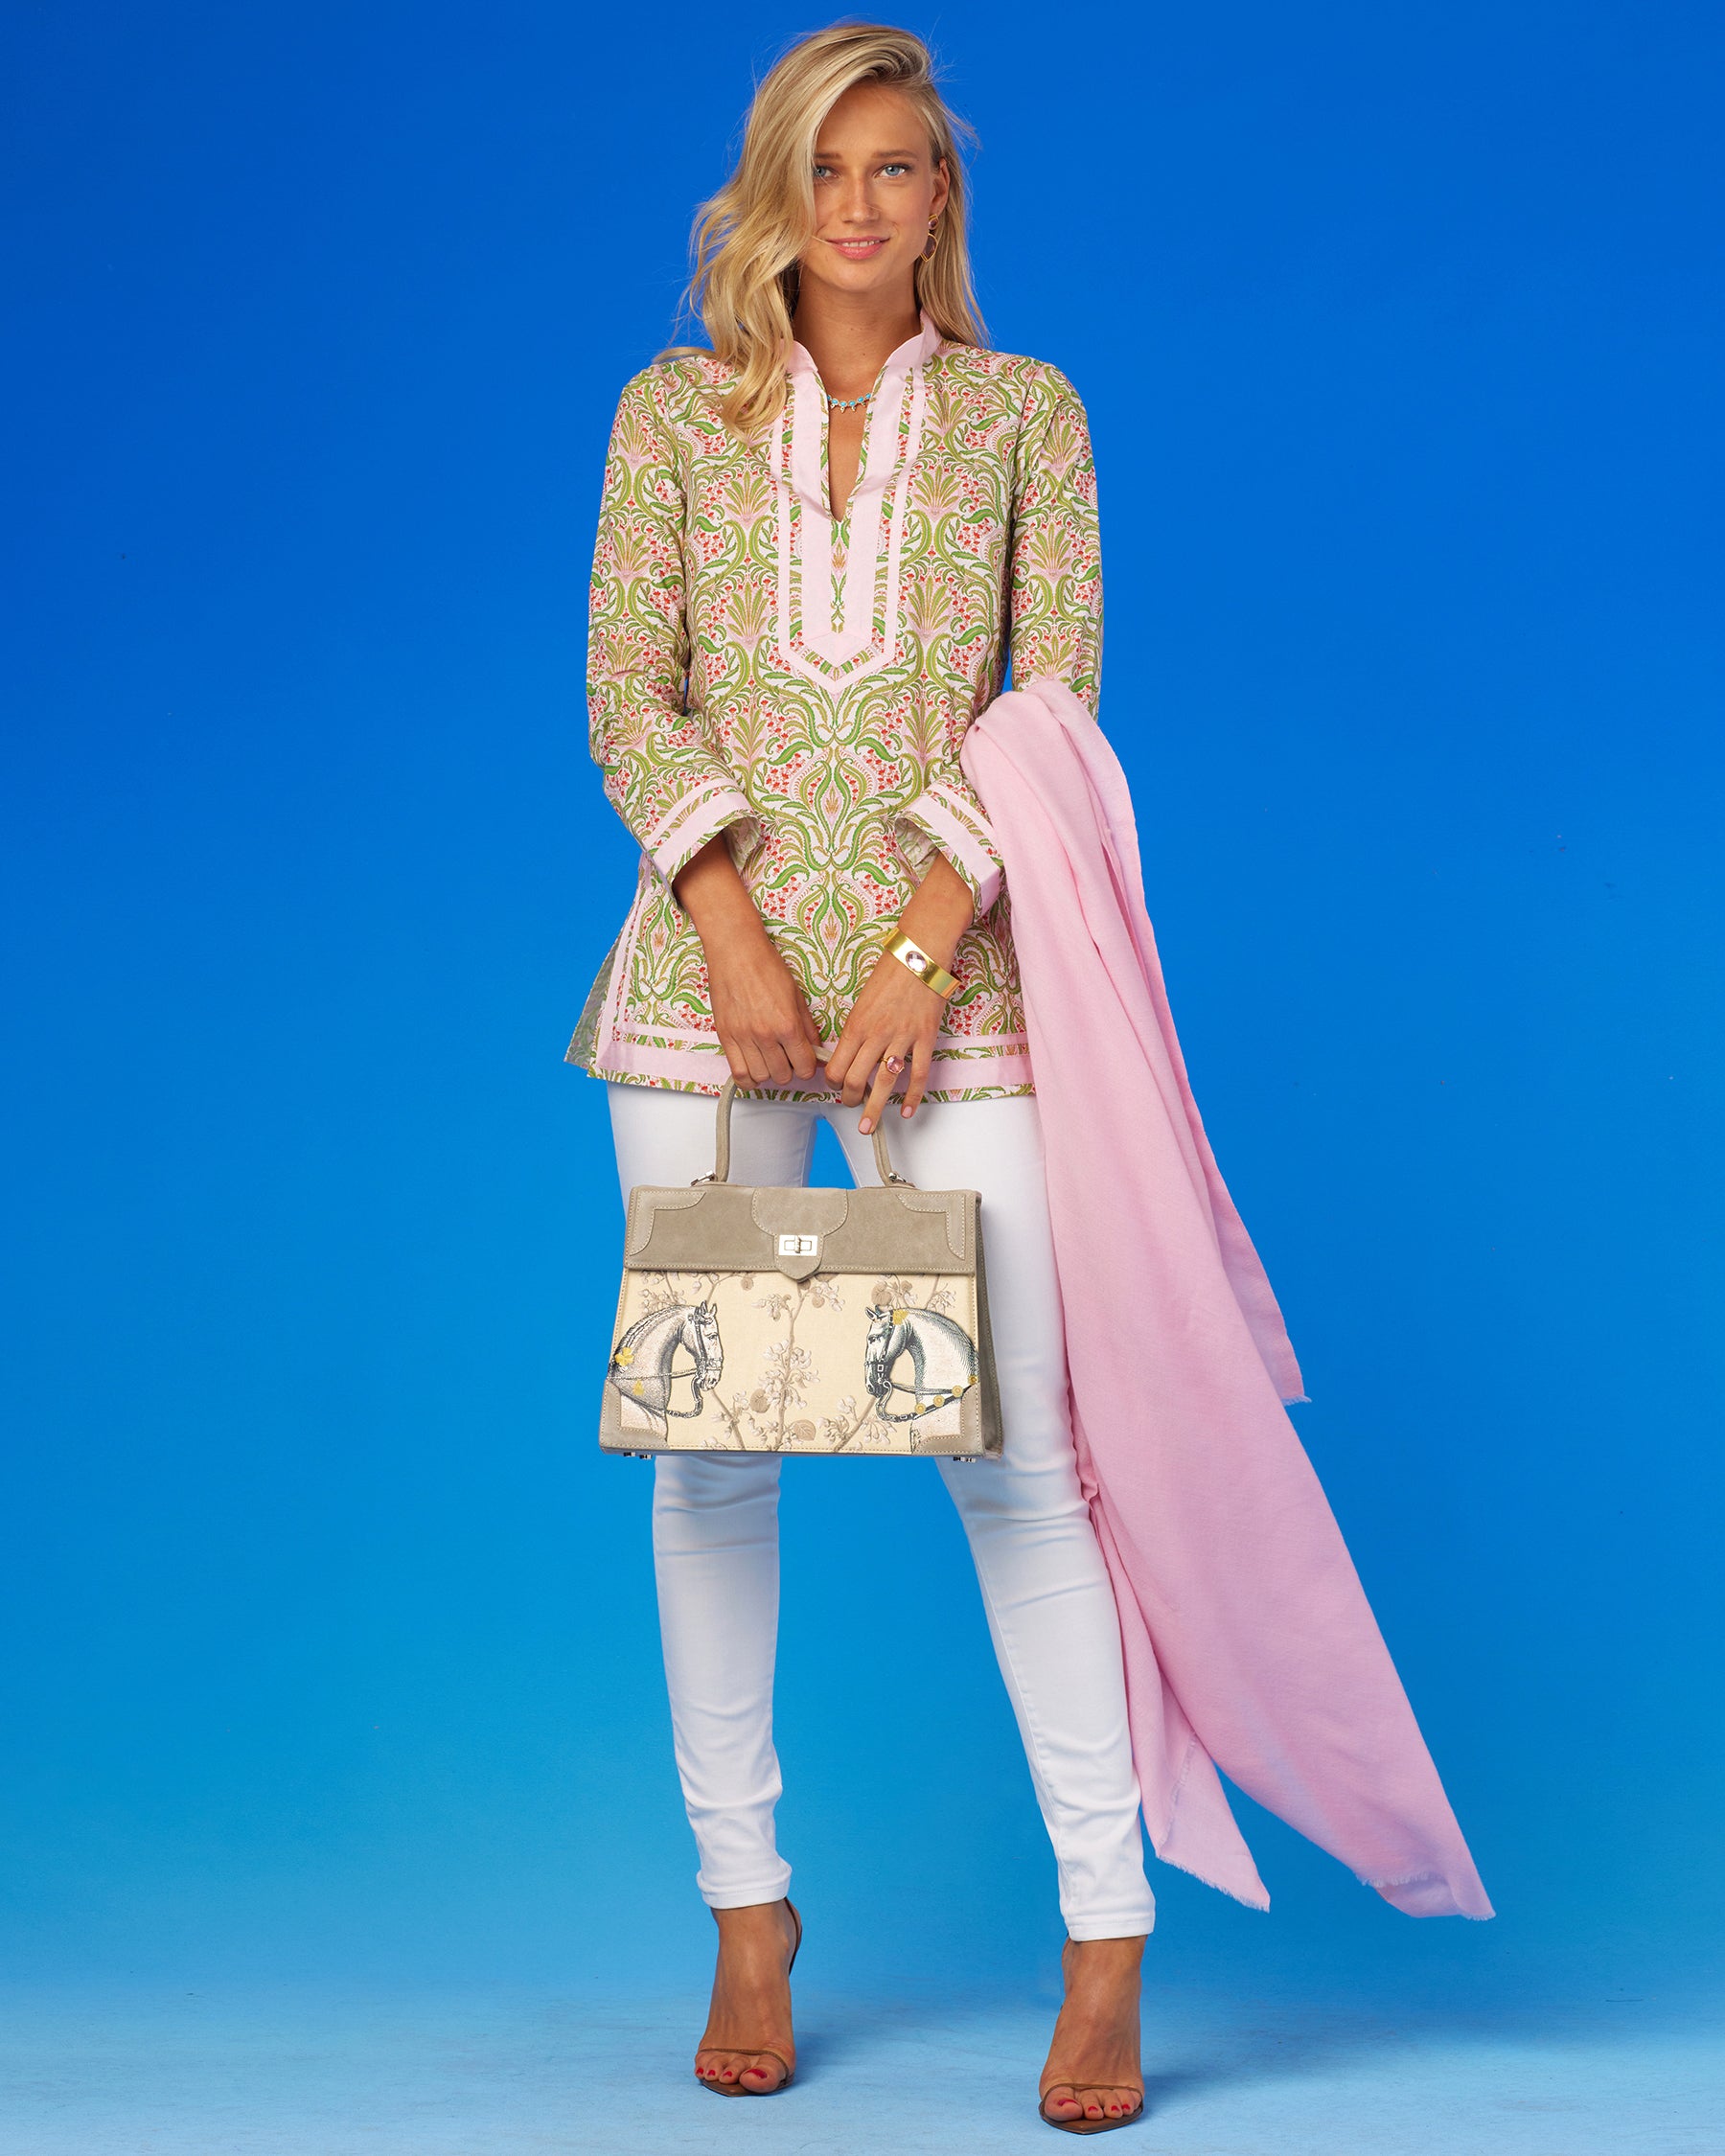 Marquise Paris Recontre Équestre Top Handle Shoulder Bag in Sand-Worn with the Capri Tunic in Delicate Ferns and Josephine Pashmina Shawl